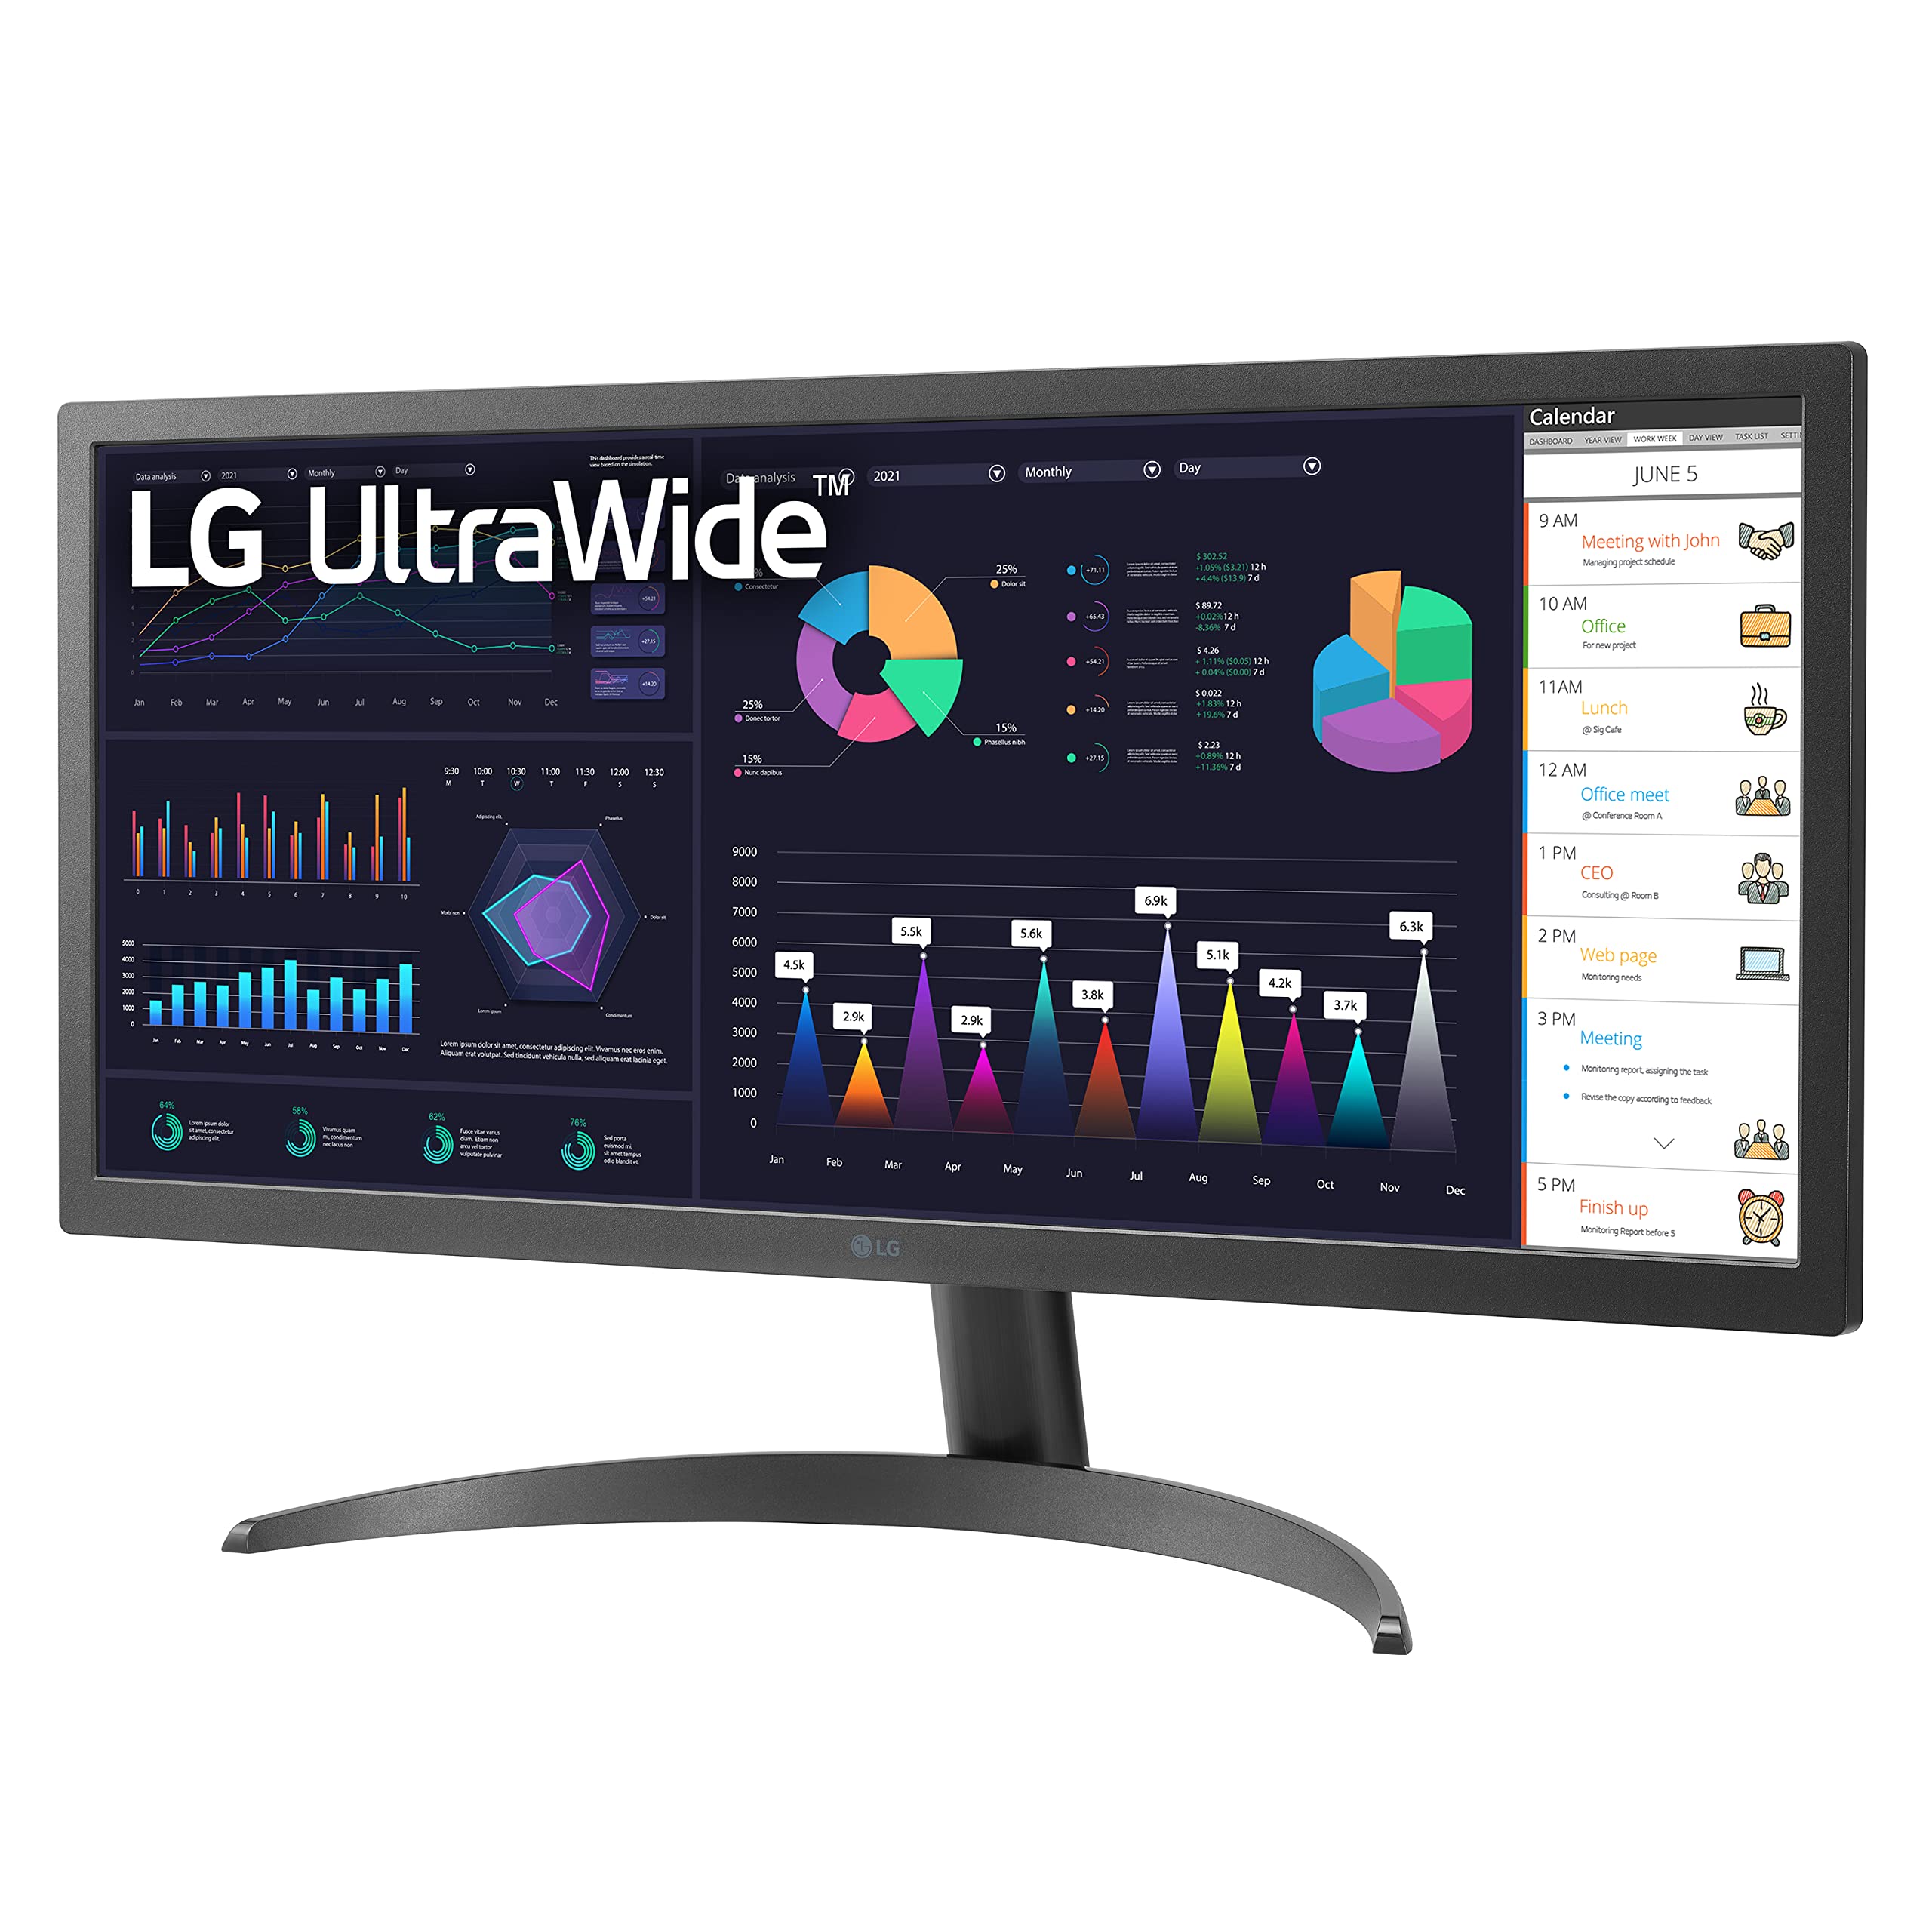 LG UltraWide FHD 26-Inch Computer Monitor 26WQ500-B, IPS with HDR 10 Compatibility and AMD FreeSync, Black